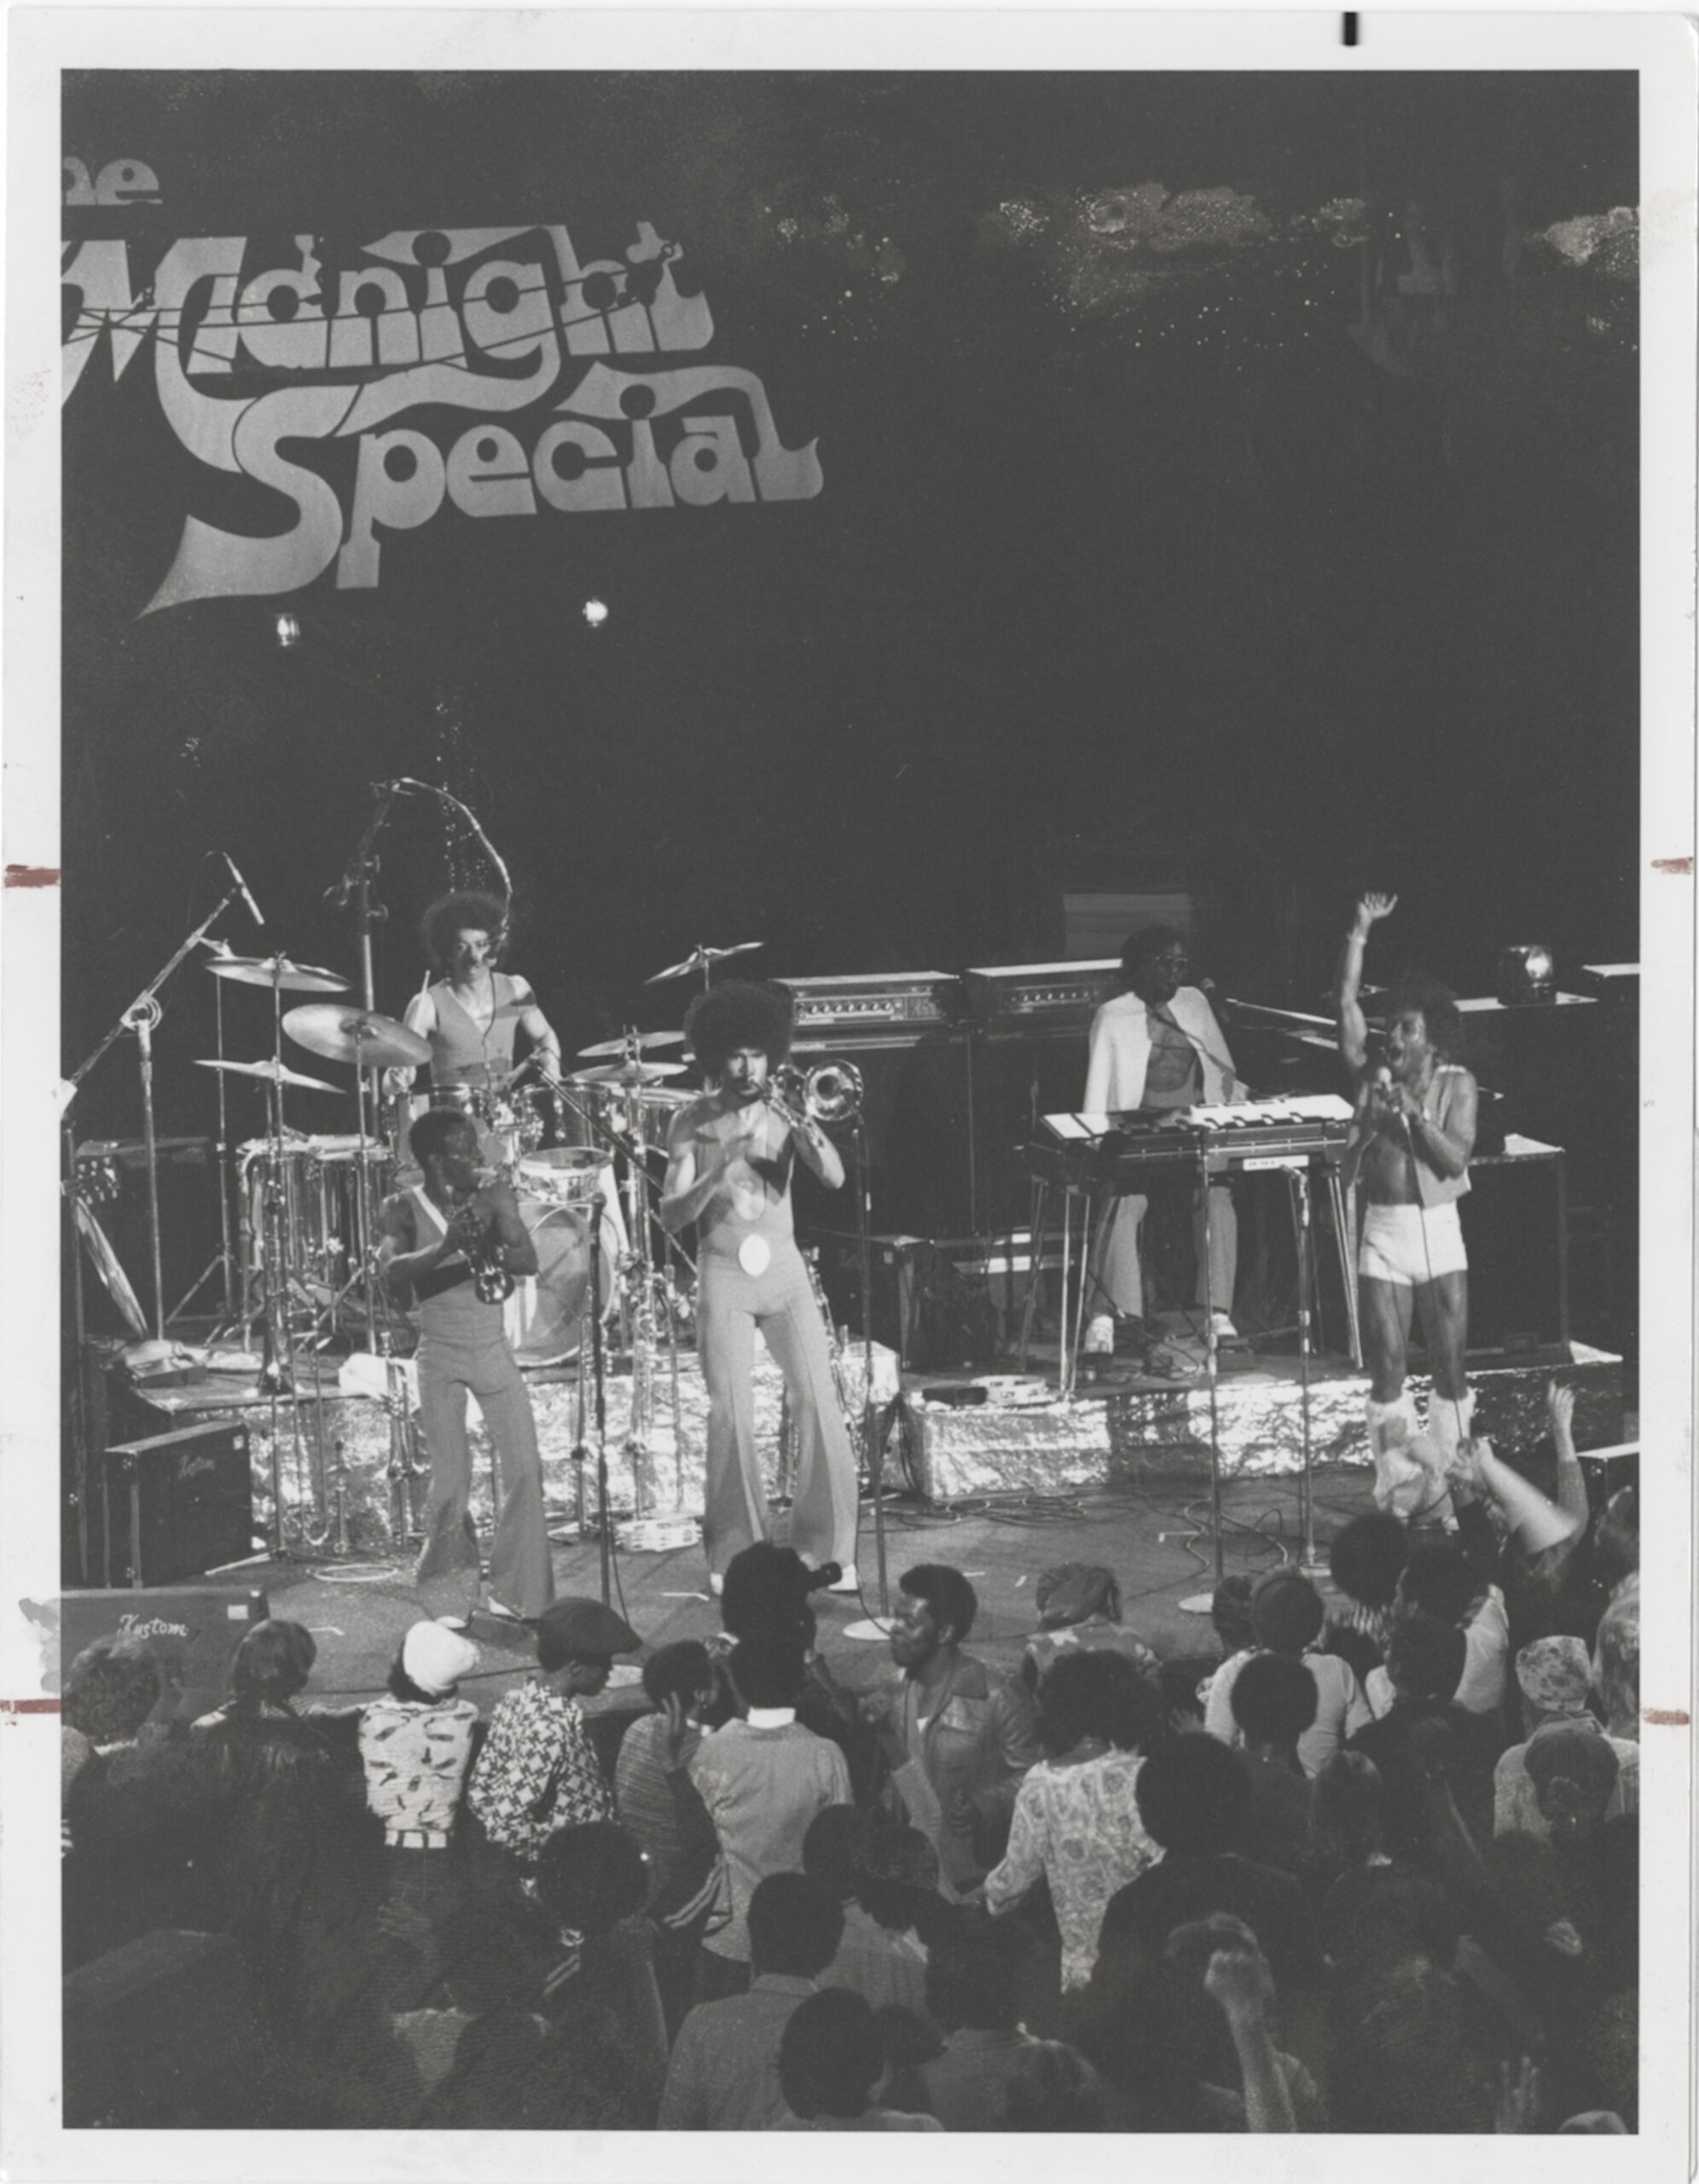 A black and white photo of a band playing instruments and singing into microphones on stage in front of an audience. The band is stylishly dressed in bellbottom pants and some of the members have natural Afro hairstyles. In the background, there are letters that read "Midnight Special"